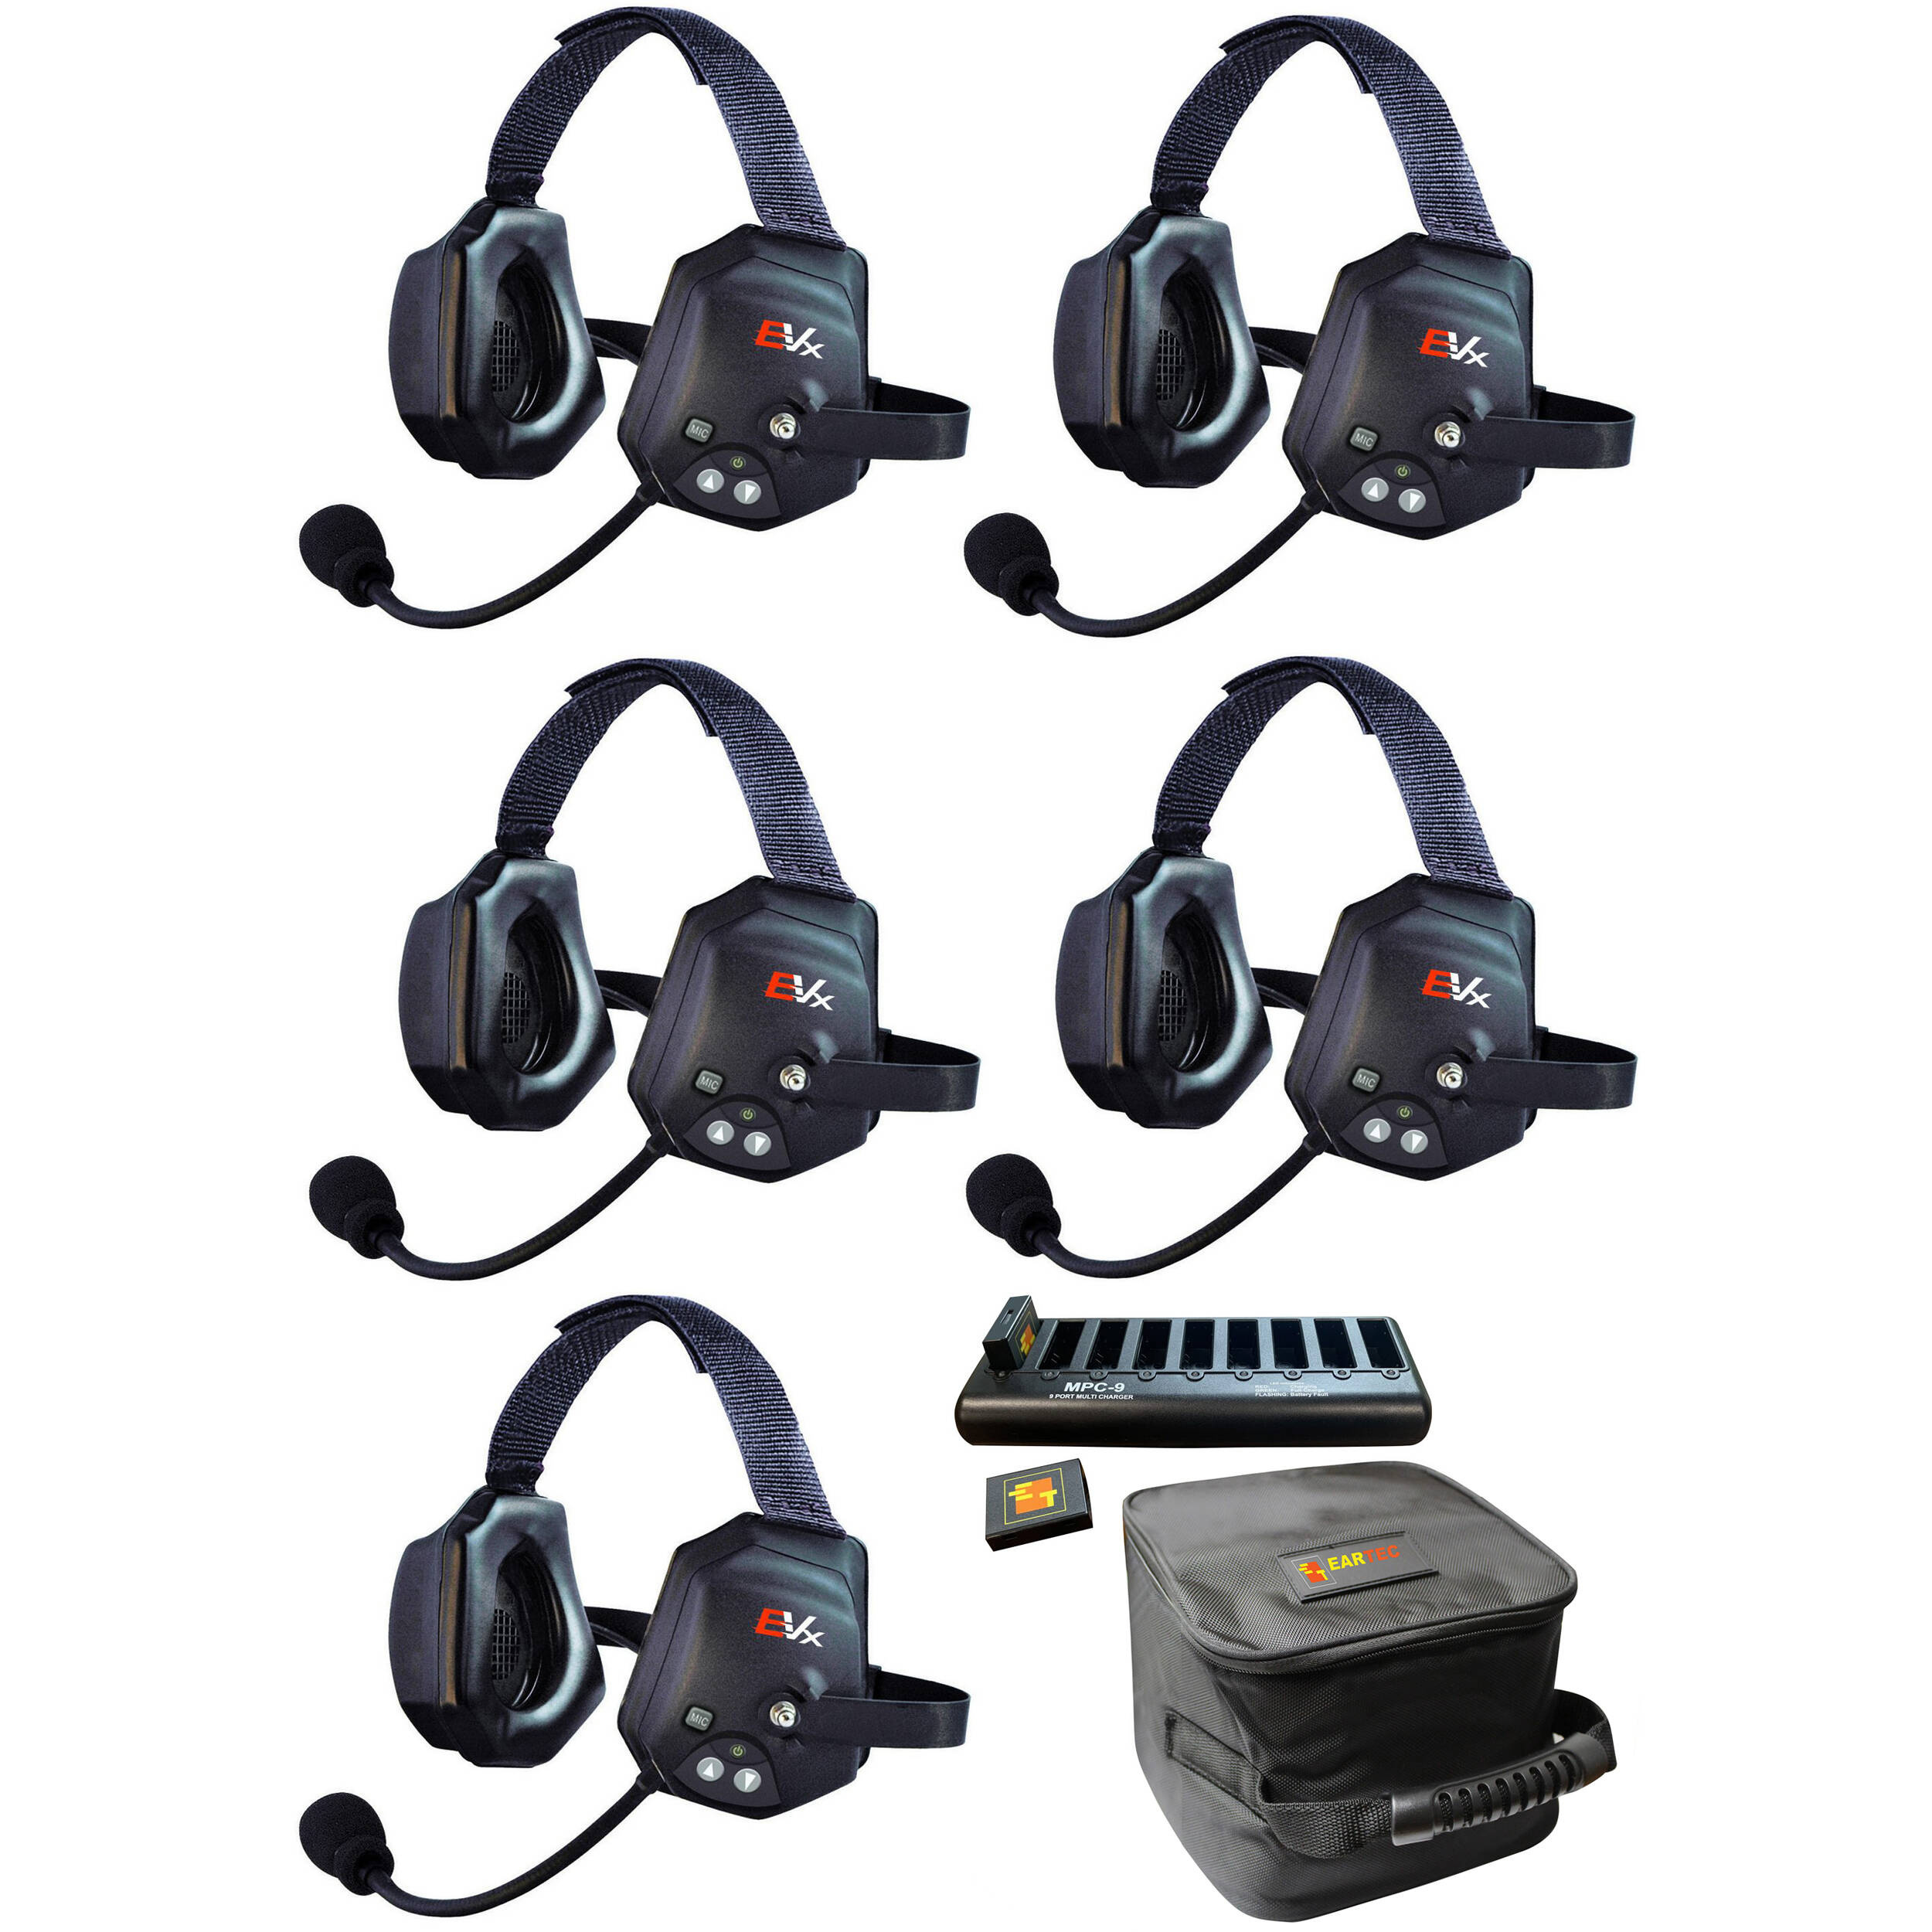 Eartec EVADE XTreme EVXT5 Industrial Full-Duplex Wireless Intercom System with 5 Dual-Ear Headsets